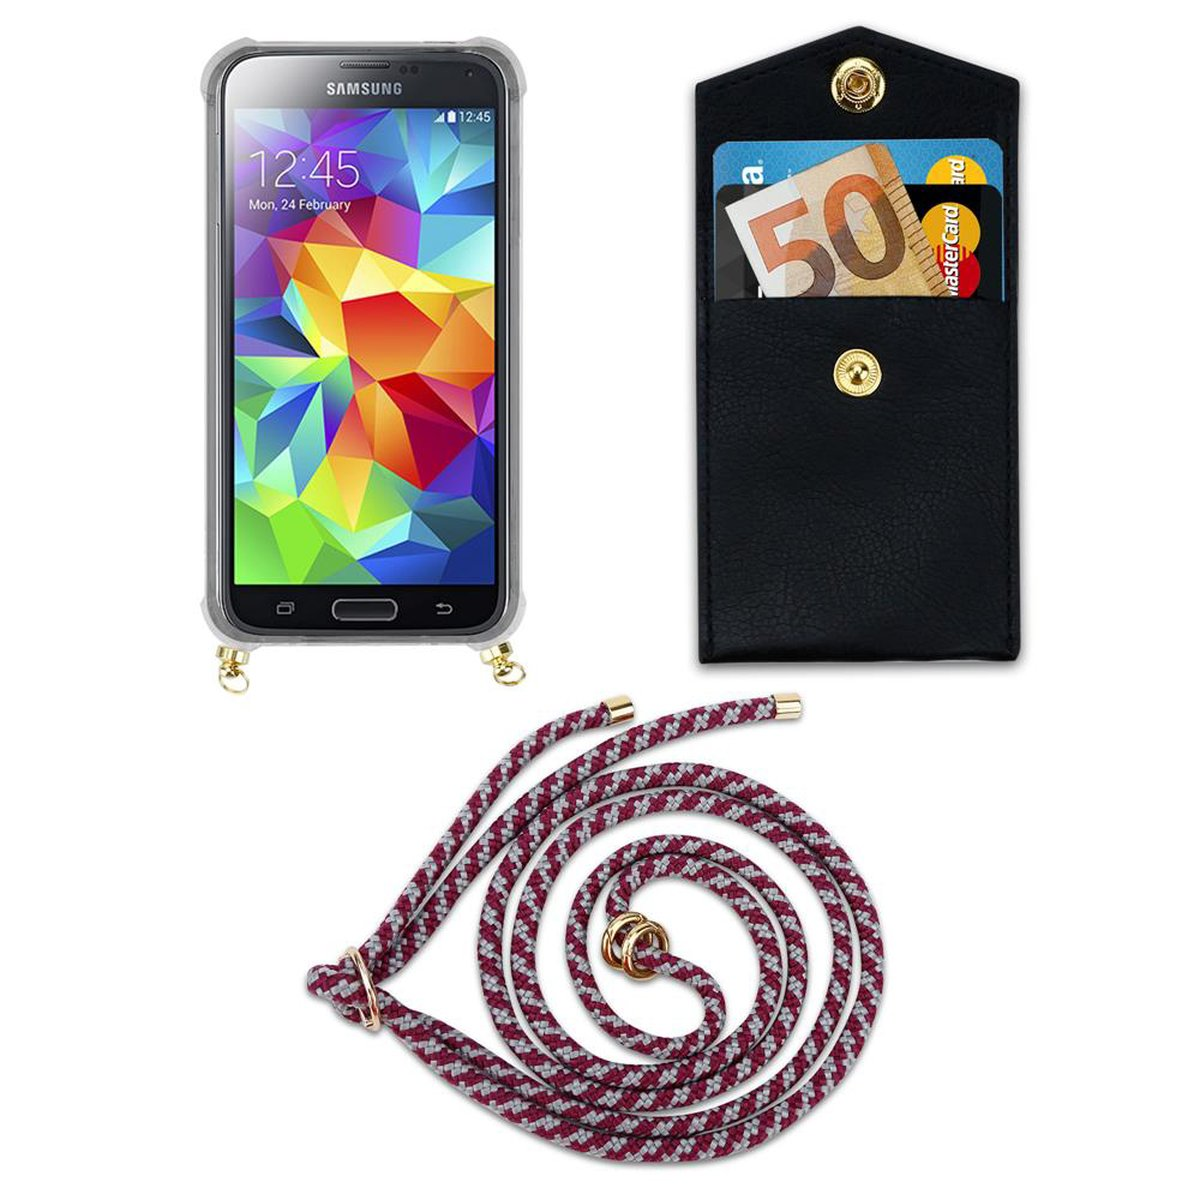 Handy NEO, Ringen, S5 Galaxy und Kordel ROT Backcover, CADORABO S5 Gold abnehmbarer Samsung, / WEIß Band Kette Hülle, mit